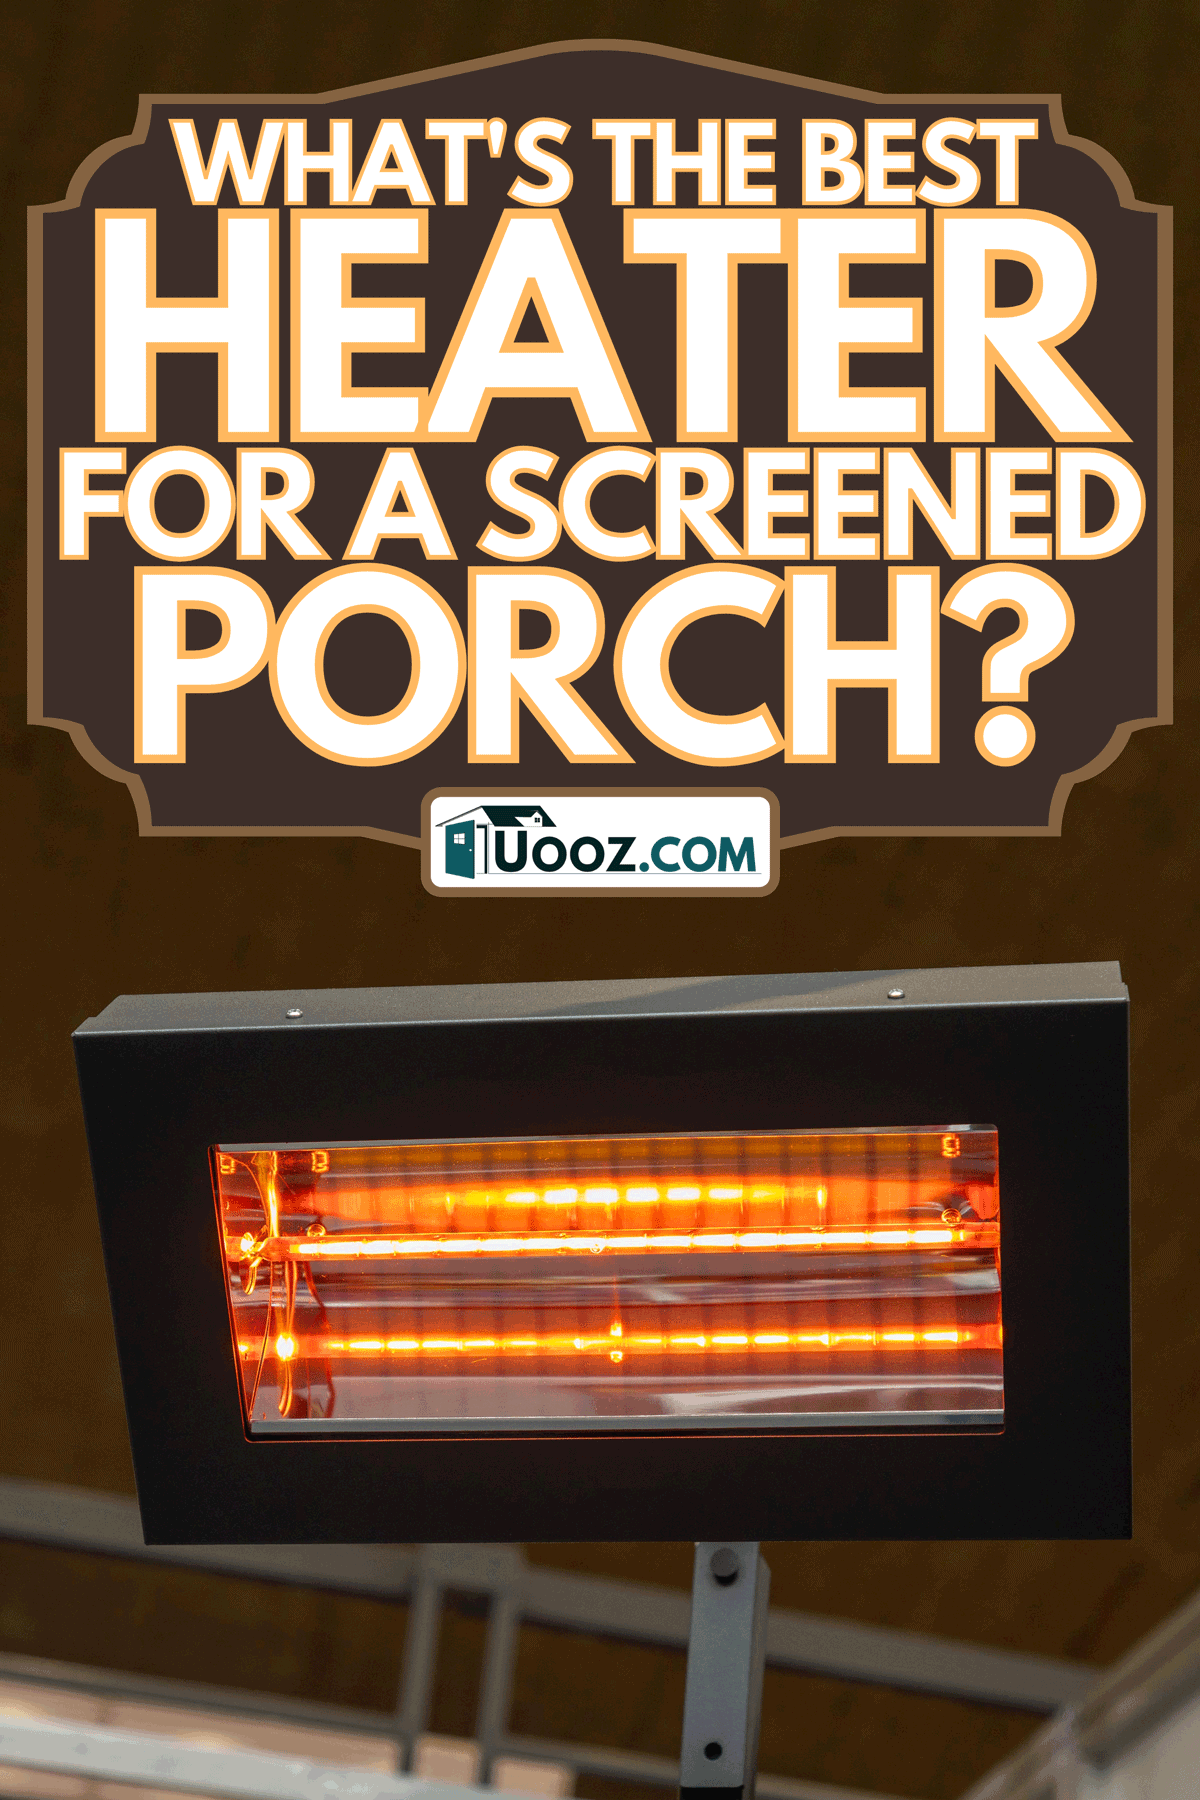 Infrared heater for terraces and porch, What's The Best Heater For A Screened Porch?